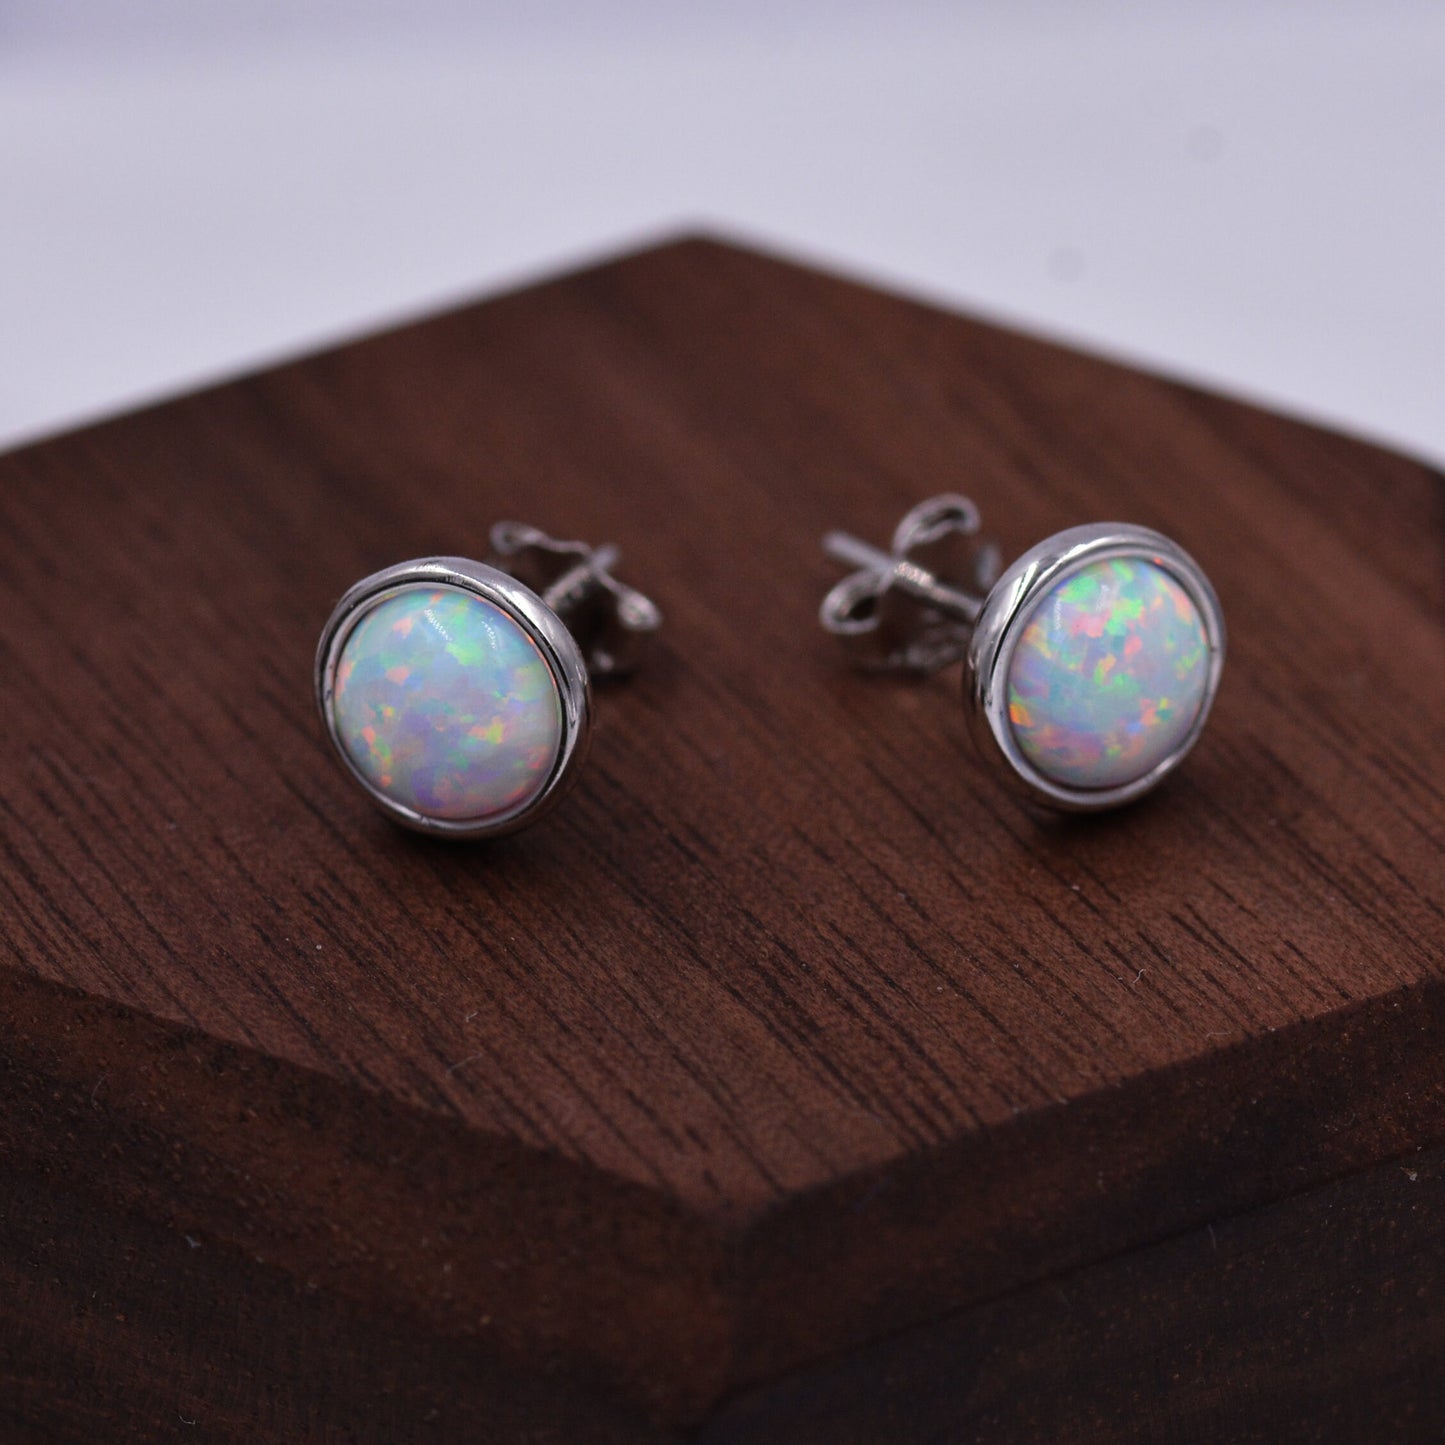 Sterling Silver White Opal  Stone Crystal Stud Earrings. Gold or Silver, Round Minimalist Dot Geometric Design. bridesmaid jewellery.